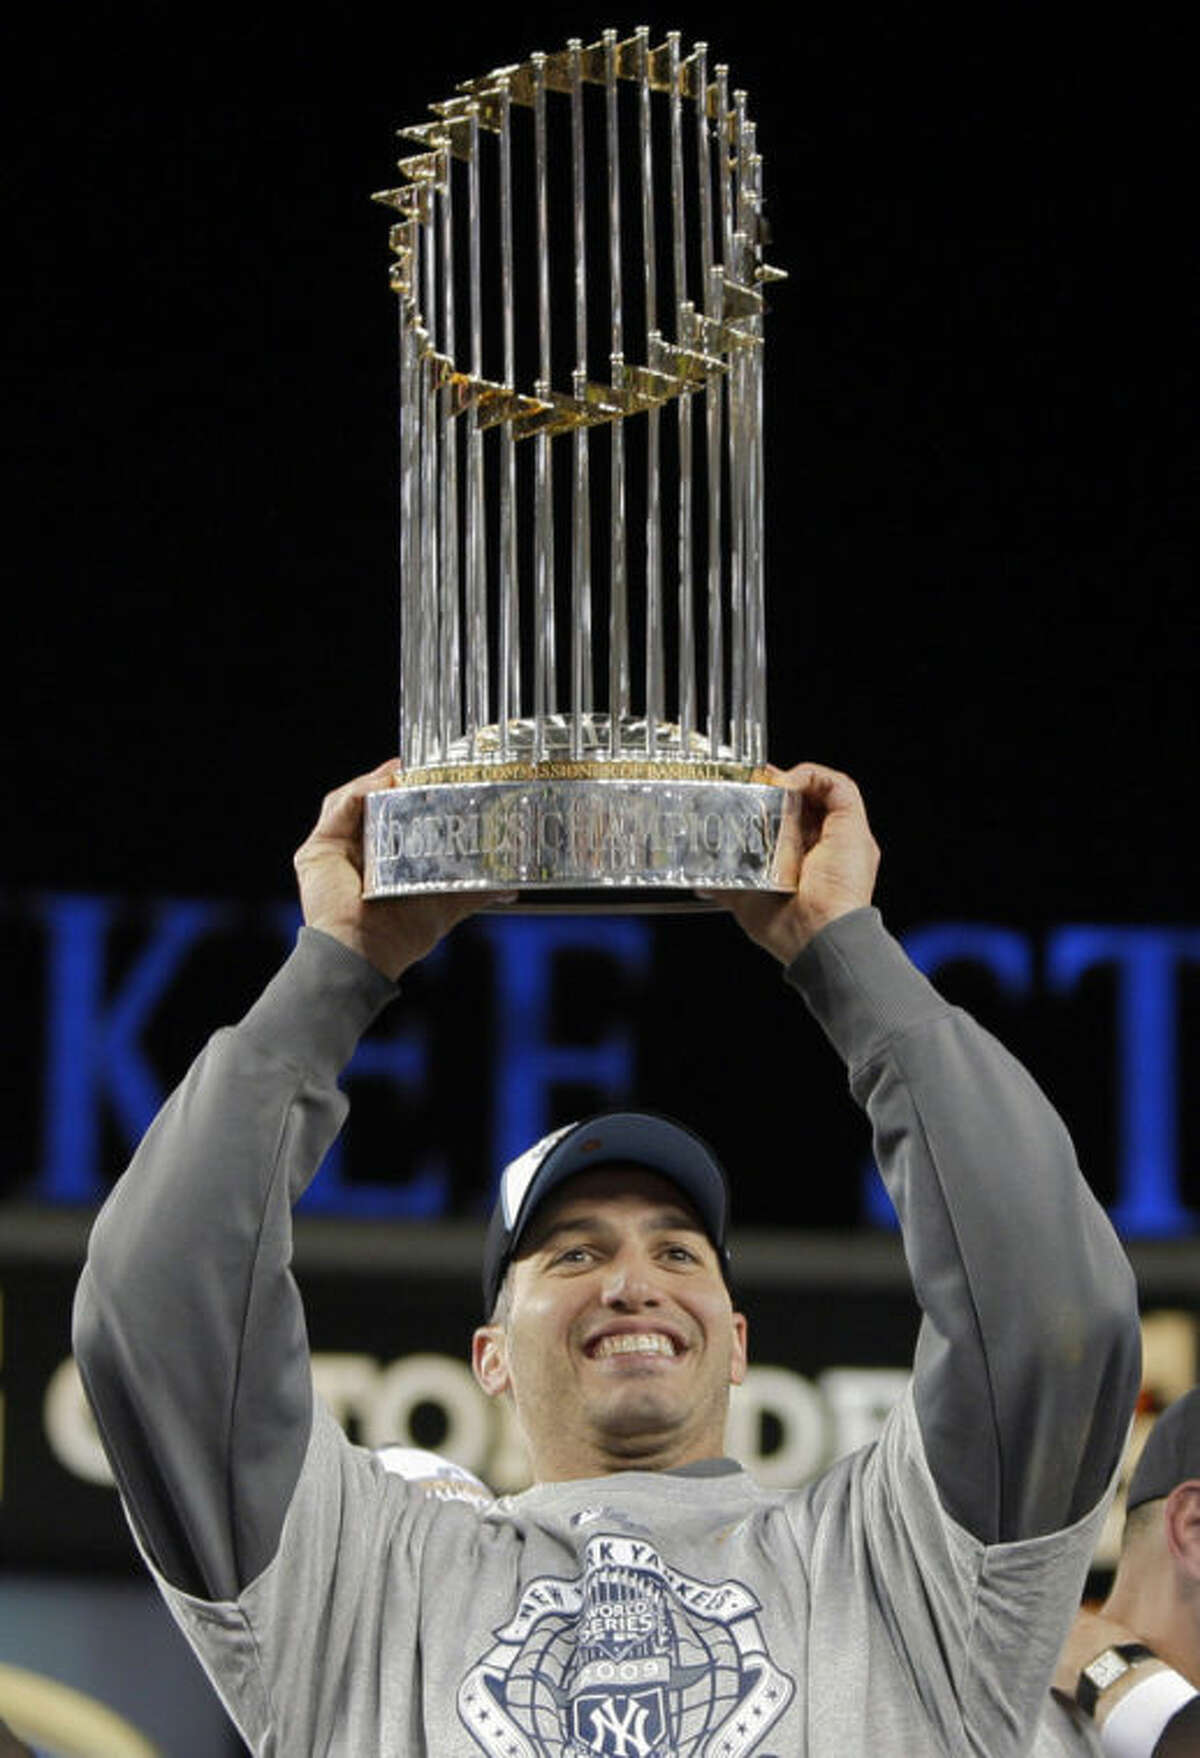 FILE - In this Nov. 4, 2009, file photo, New York Yankees' Andy Pettitte holds up the championship trophy after Game 6 of baseball's World Series against the Philadelphia Phillies in New York. Pettitte is retiring from baseball at the conclusion of the season, the Yankees announced on Friday, Sept. 20, 2013. (AP Photo/Elise Amendola, File)